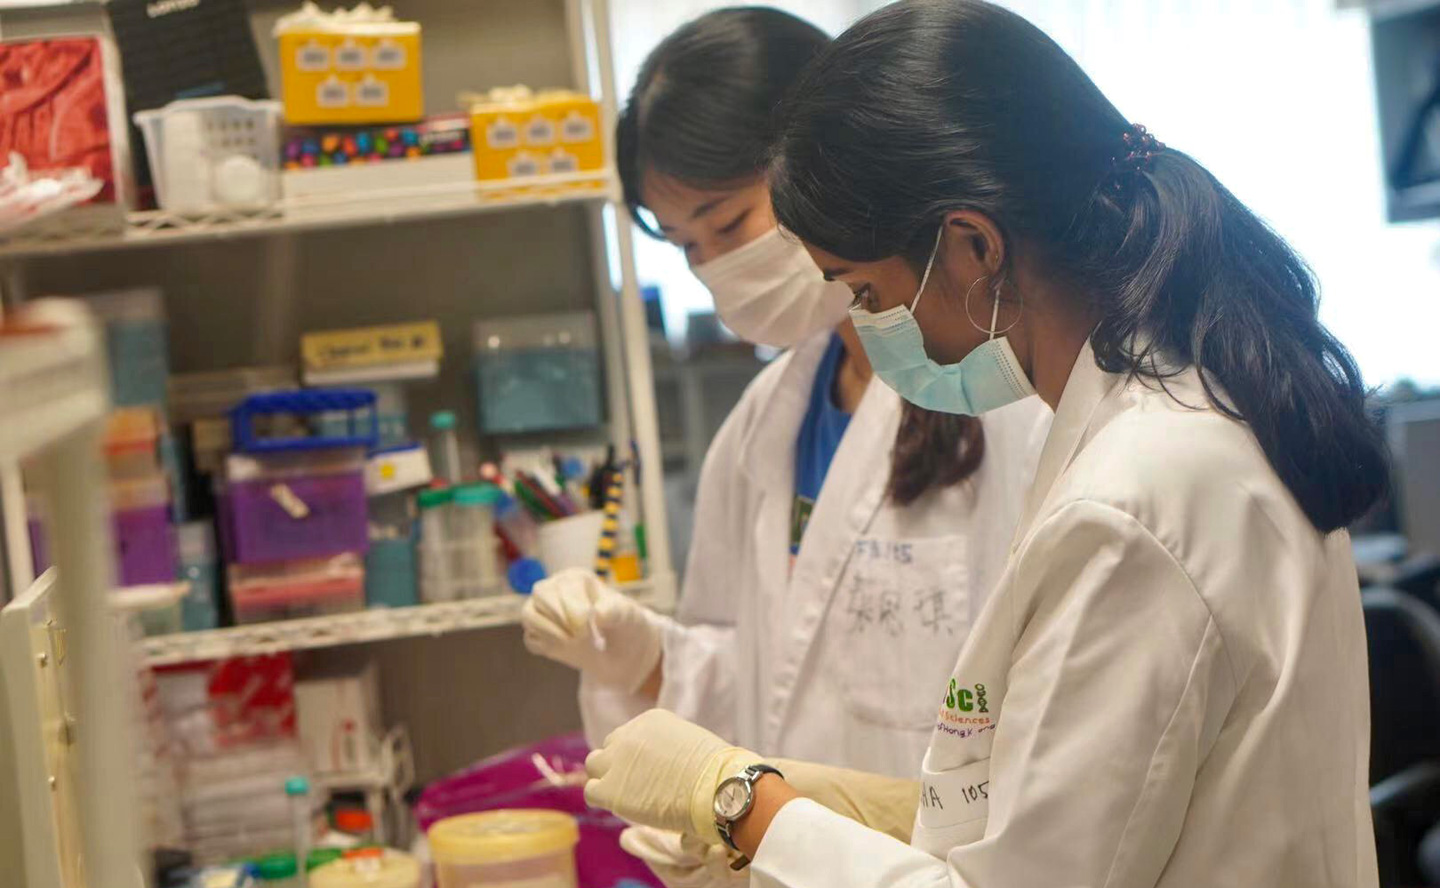 Varsha joined the Summer Undergraduate Biomedical Research Attachment at CUHK and worked at the Institute for Tissue Engineering and Regenerative Medicine for eight weeks <em>(courtesy of interviewee)</em>